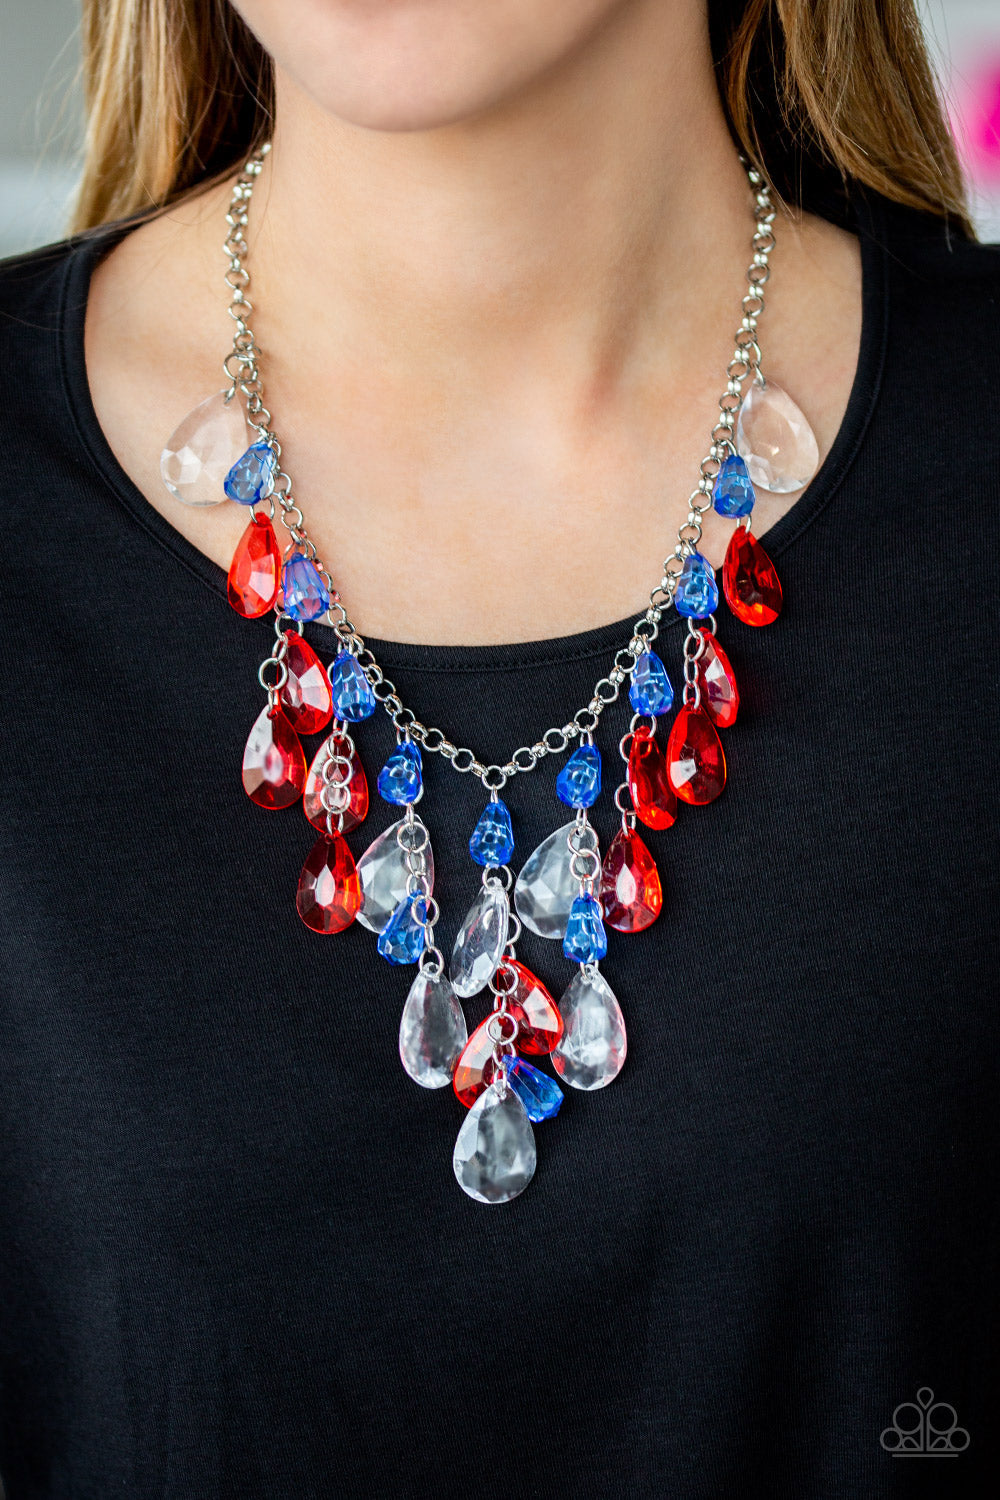 IRRESISTIBLE IRIDESCENCE - MULTI RED WHITE BLUE CLEAR 4TH OF JULY ACRYLIC NECKLACE